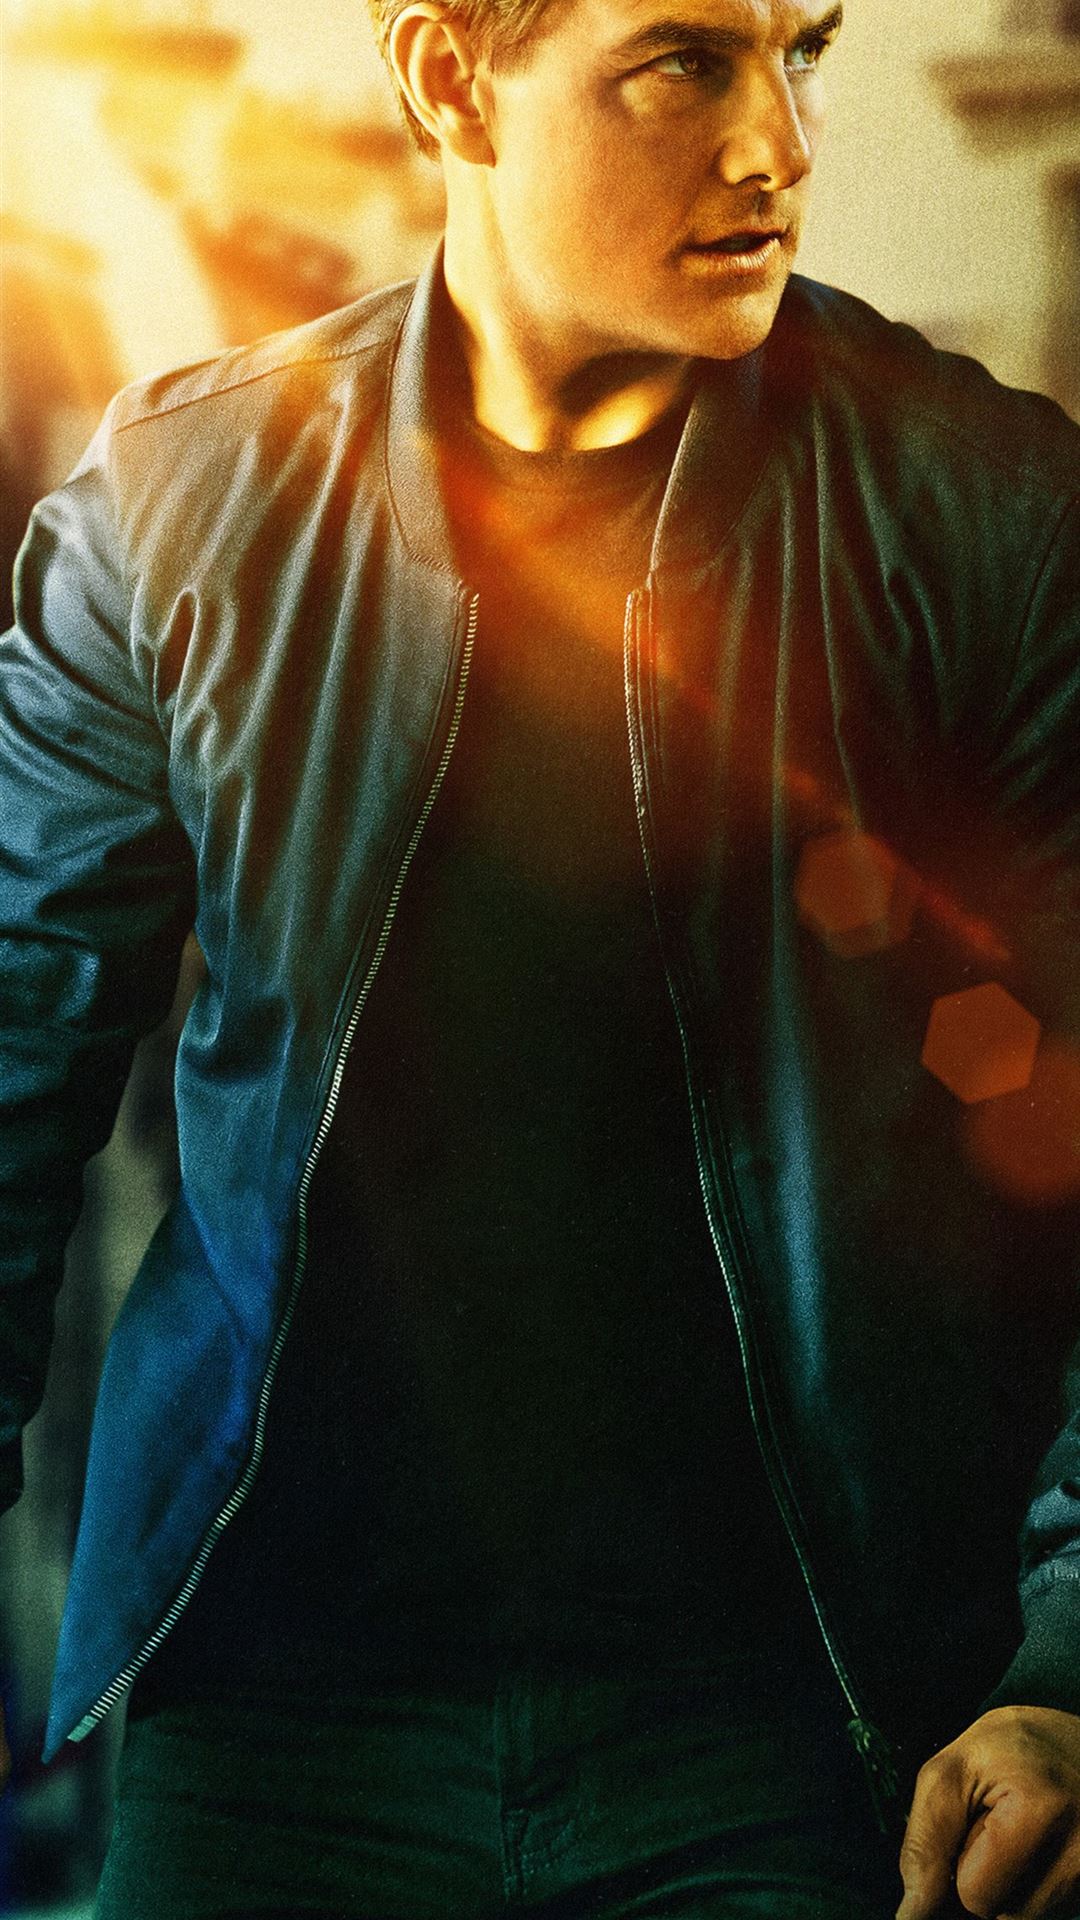 Tom Cruise As Ethan Hunt In Mission Impossible Fal. iPhone Wallpaper Free Download